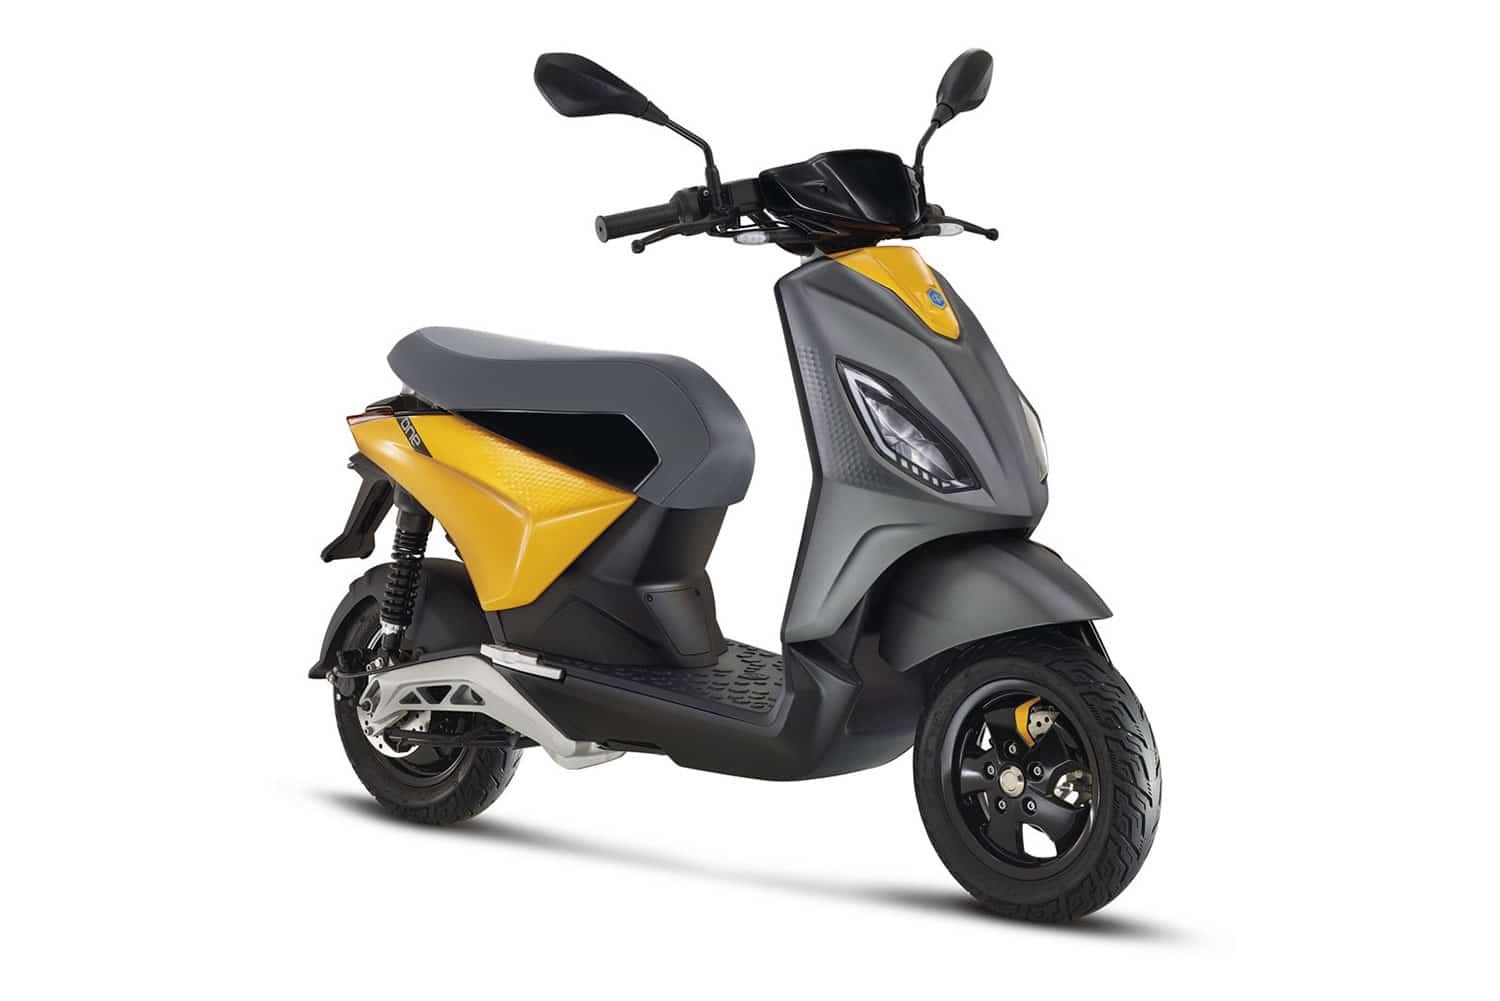 New Piaggio ONE e-scooter combines efficiency with fun.